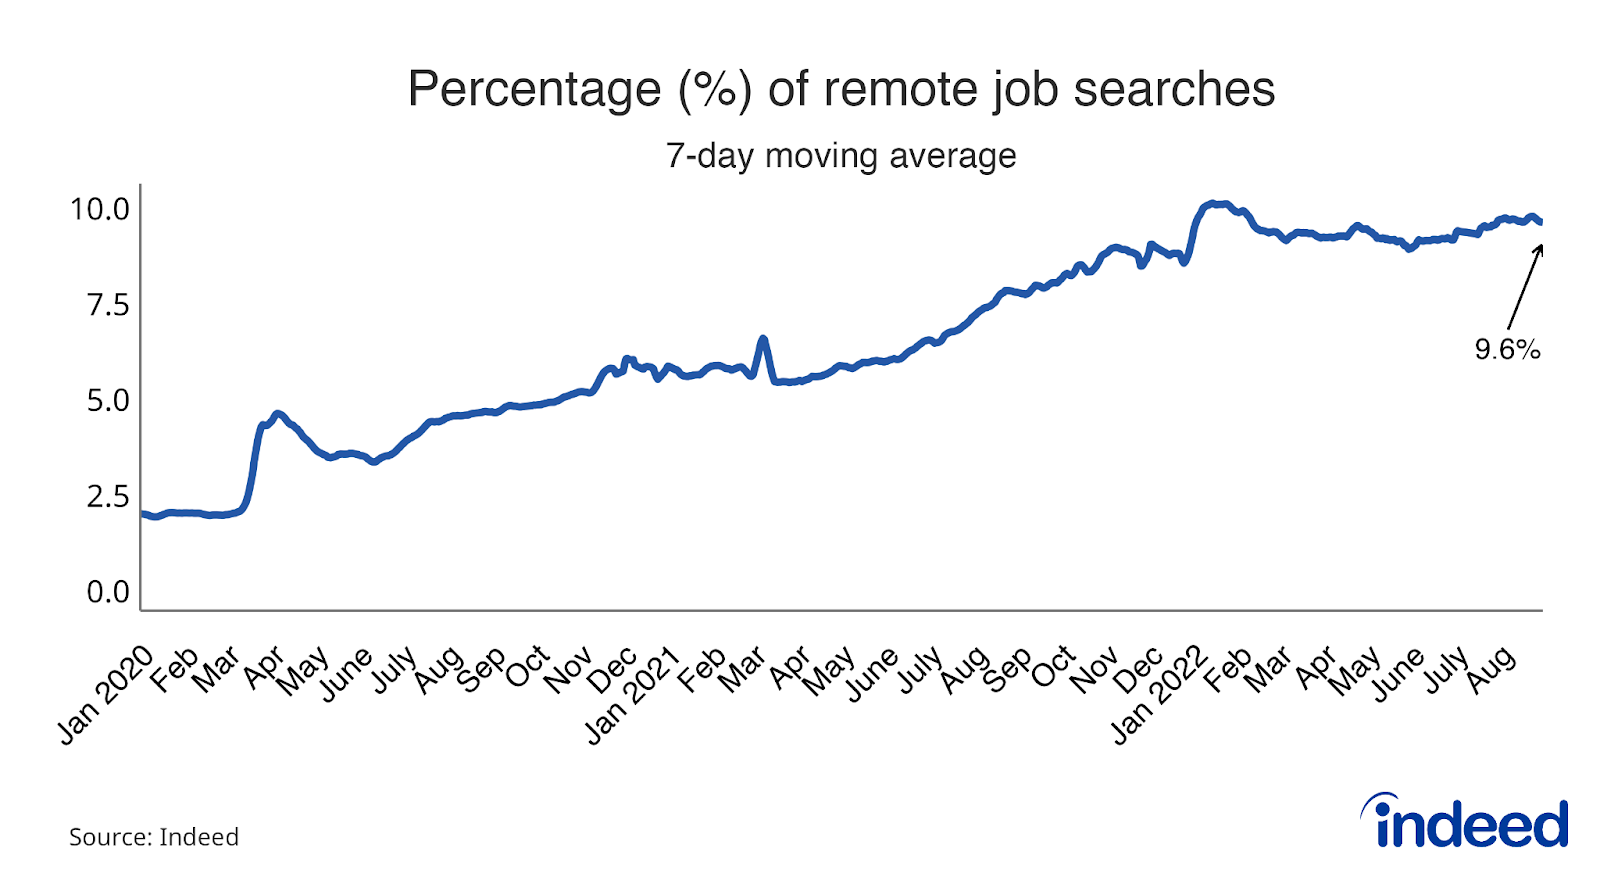 Line graph titled “Percentage (%) of remote job searches.”